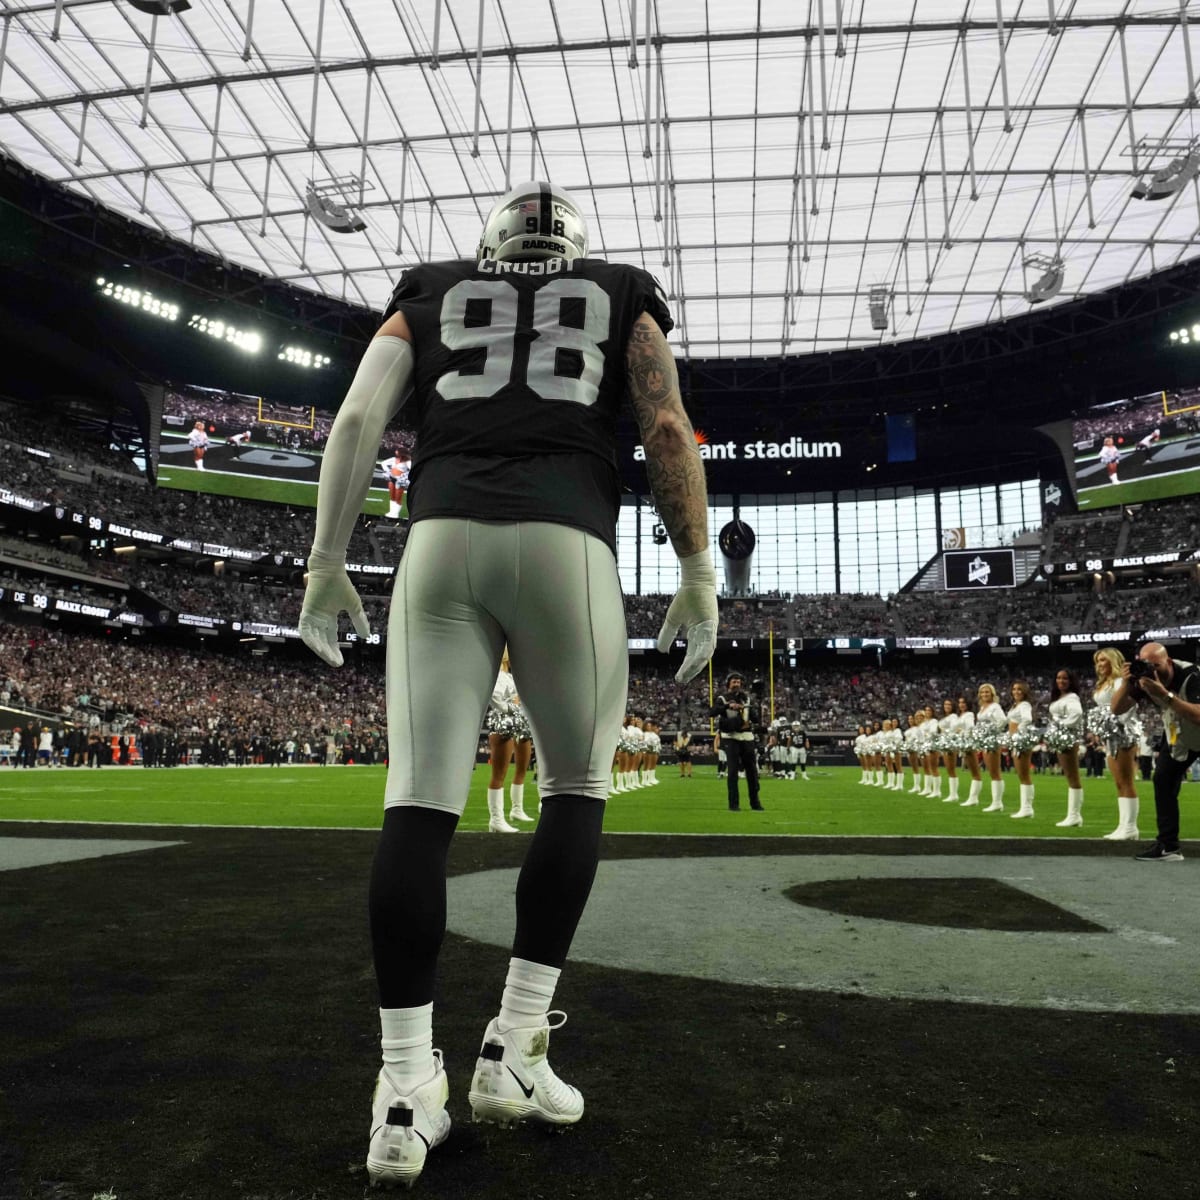 Raiders sign Pro Bowl DE Maxx Crosby to 4-year, $99 million extension